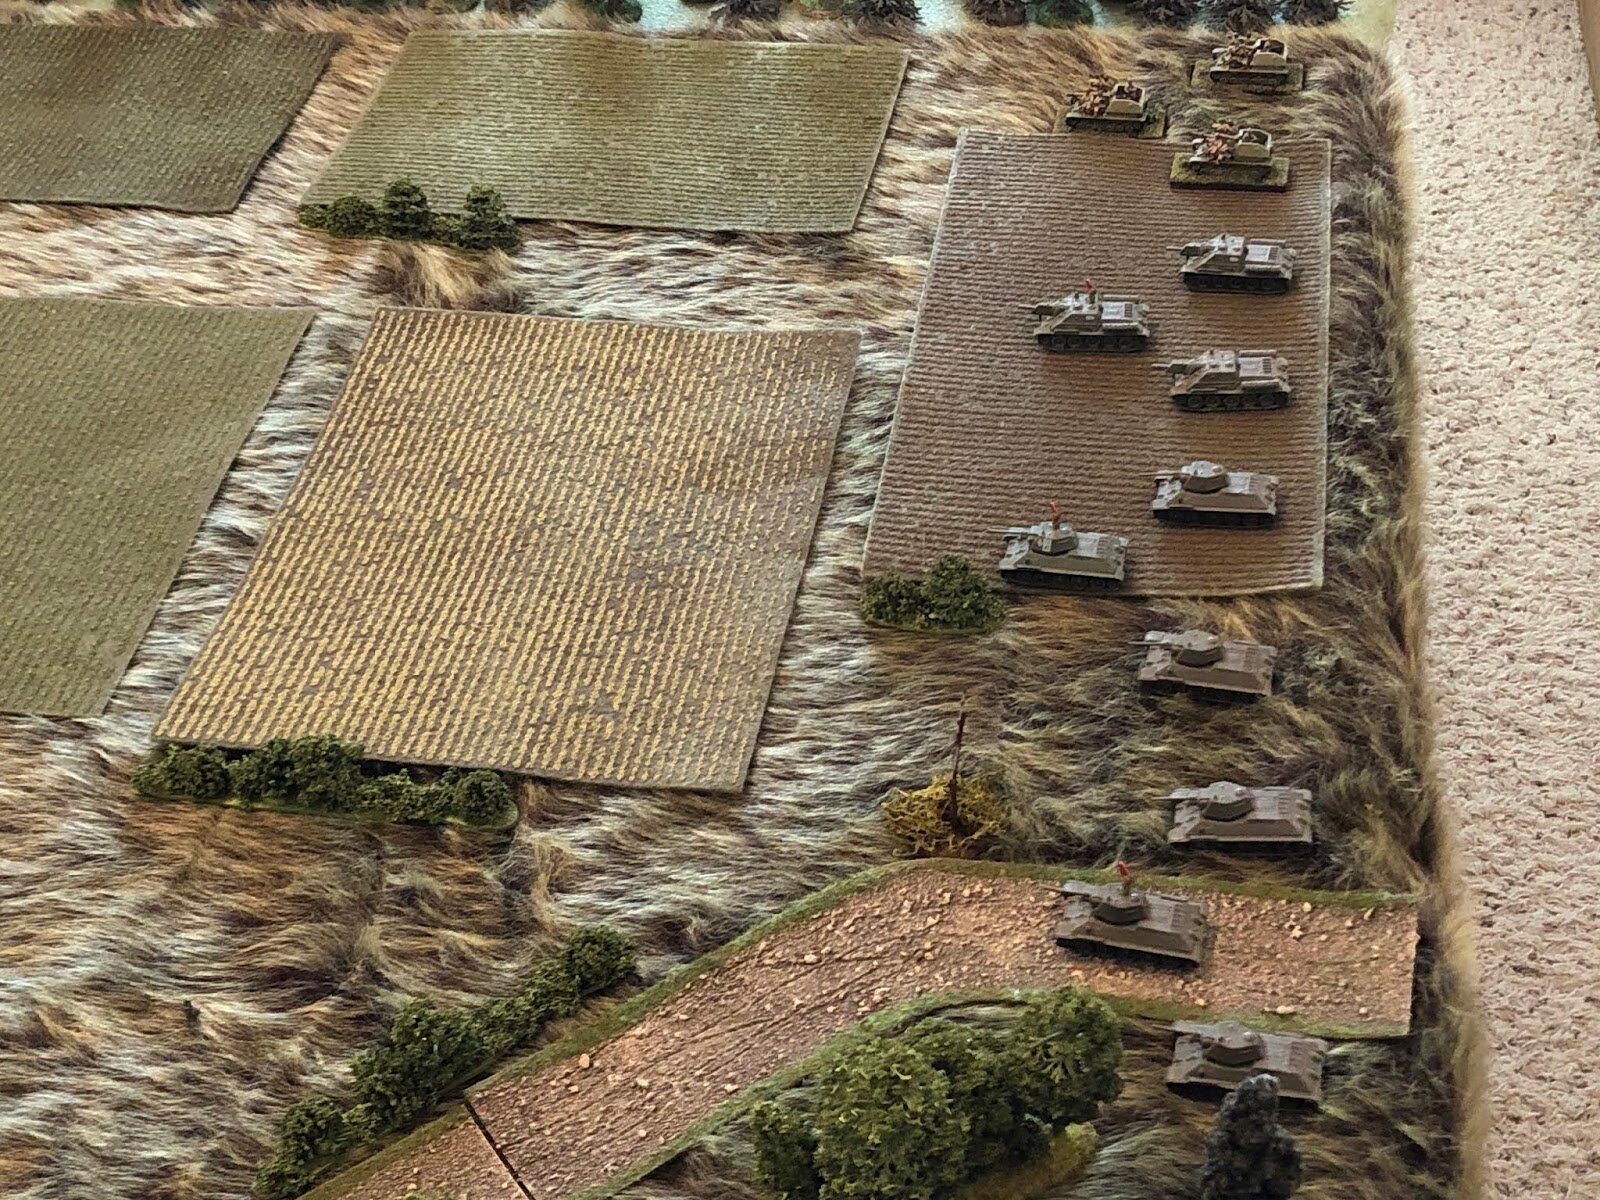  Look at all that heavy metal.  Their plan is to dash straight through the defenders, sowing chaos and unhinging the defense, even kick out some infantry (the tank riders on the Su-76s at top right) in the German rear.  The issue, as anyone familiar 